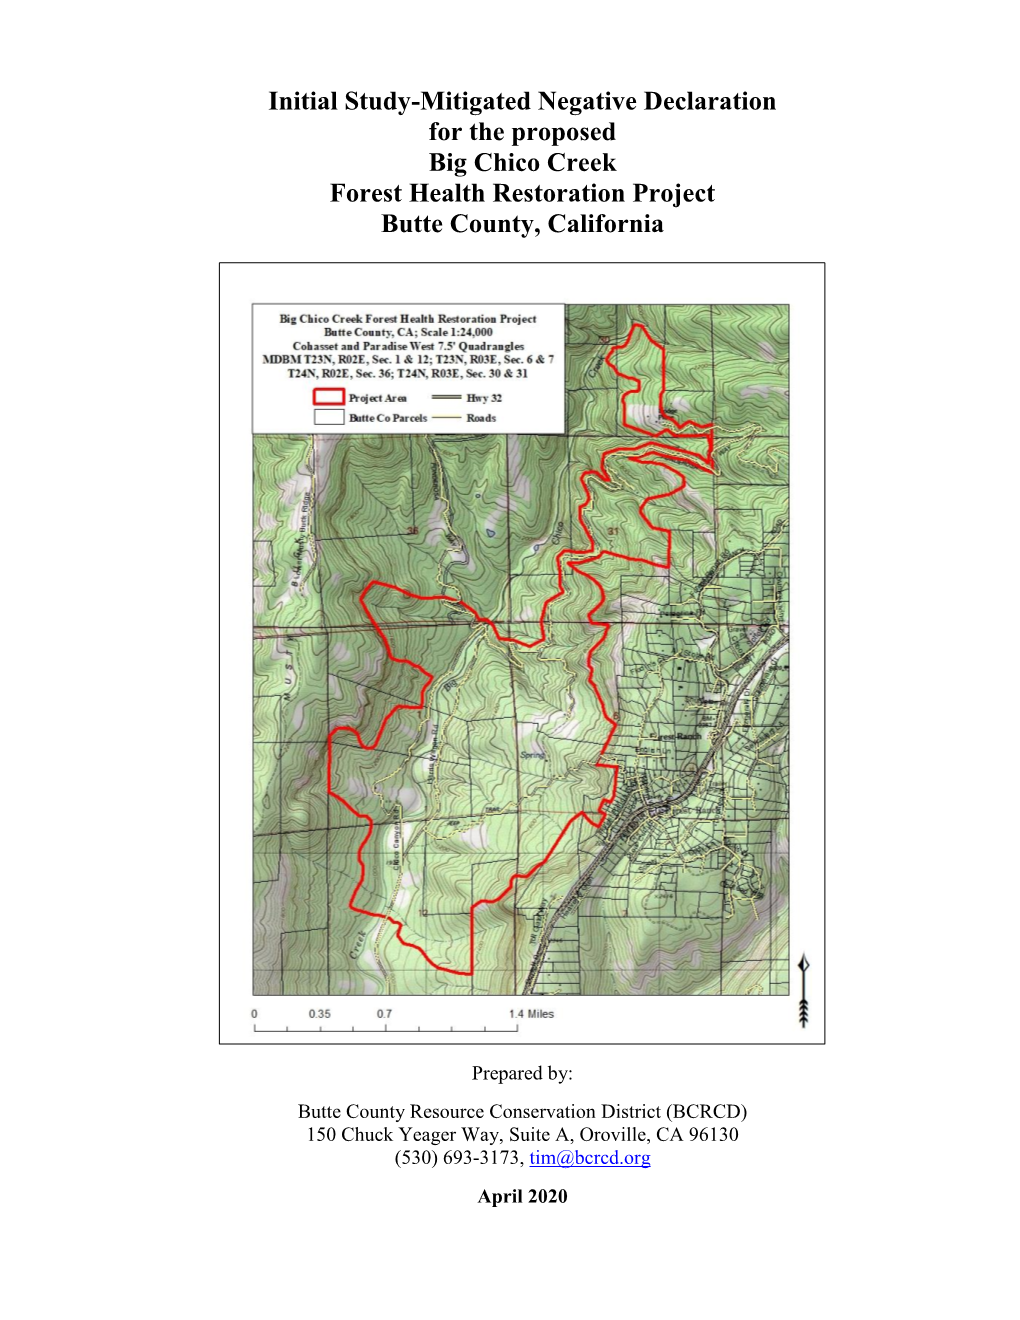 Initial Study-Mitigated Negative Declaration for the Proposed Big Chico Creek Forest Health Restoration Project Butte County, California